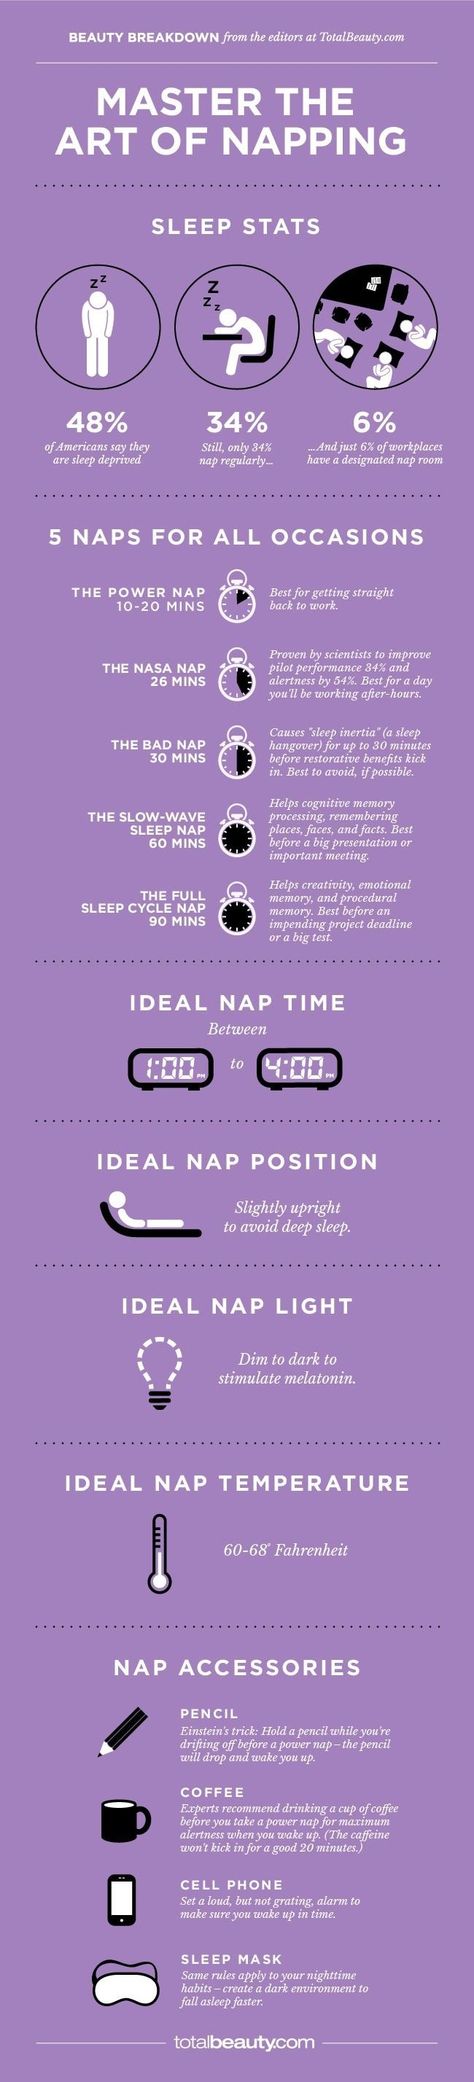 Master the Art of Napping Health Tips, Life Hacks, Loose Skin, Things To Know, Better Sleep, Self Improvement, Helpful Hints, Health And Wellness, Fun Facts